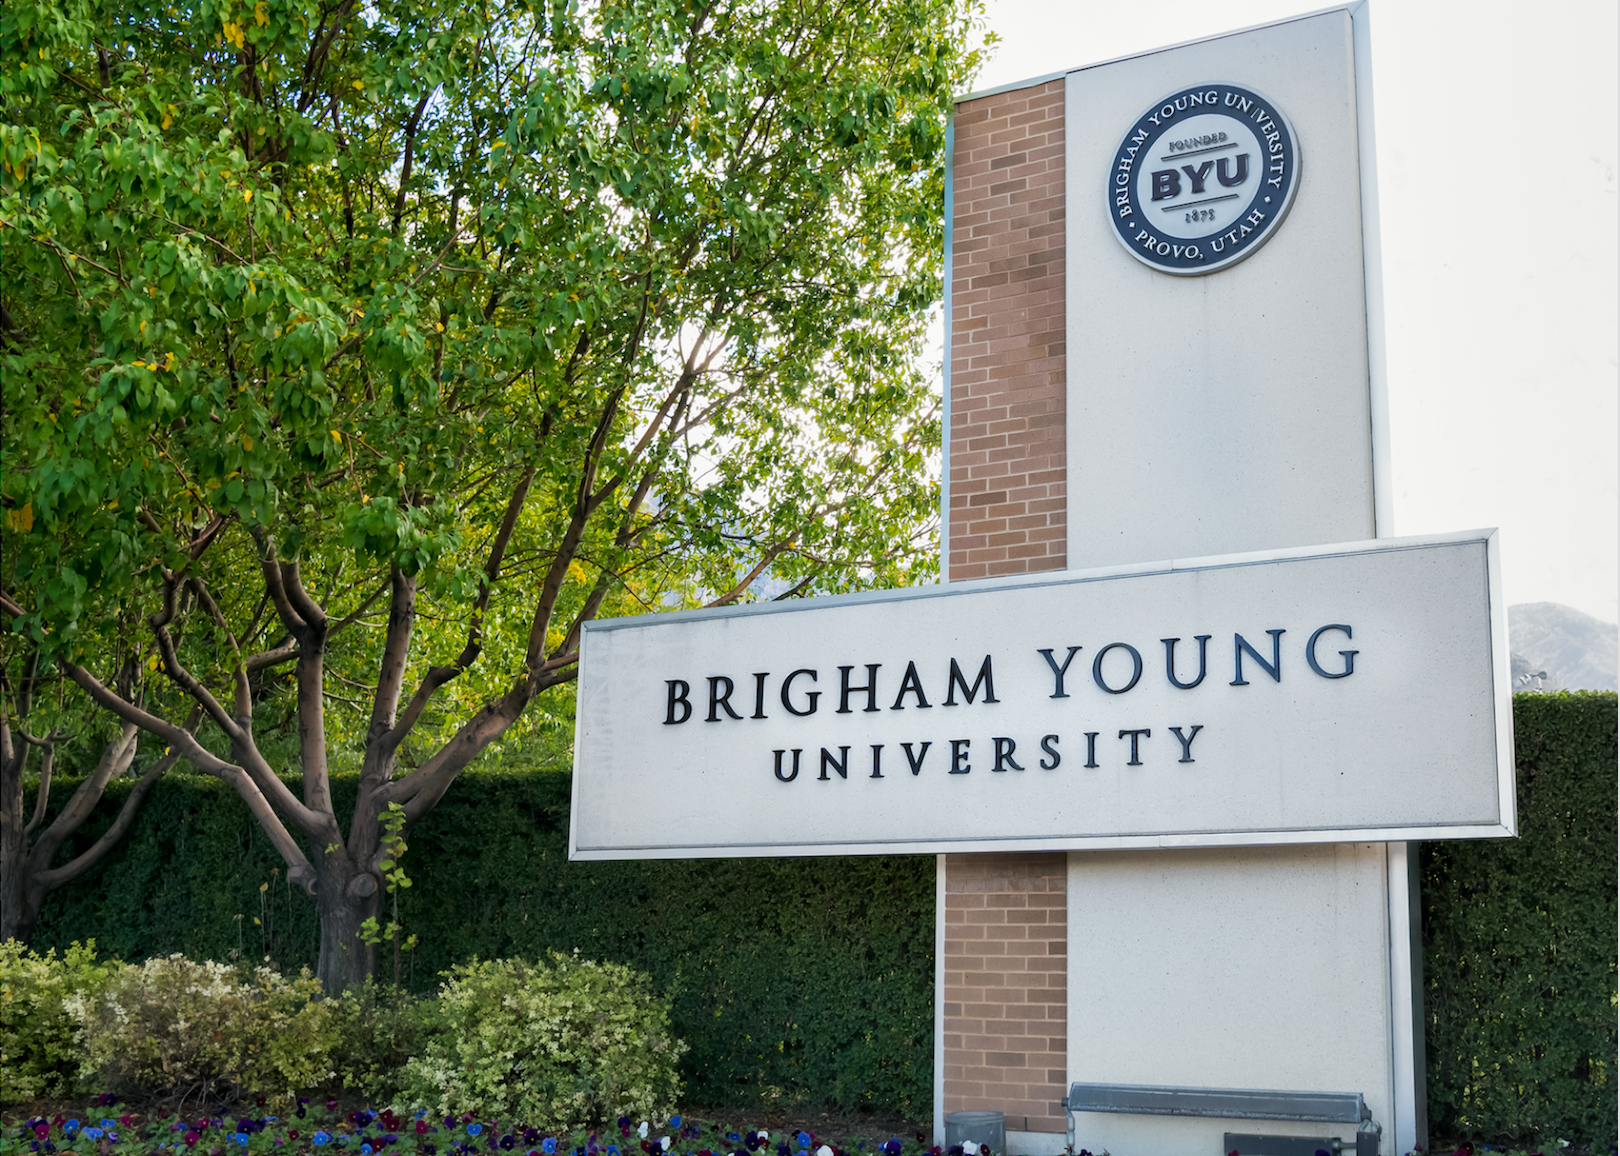 The entrance sign to Brigham Young.